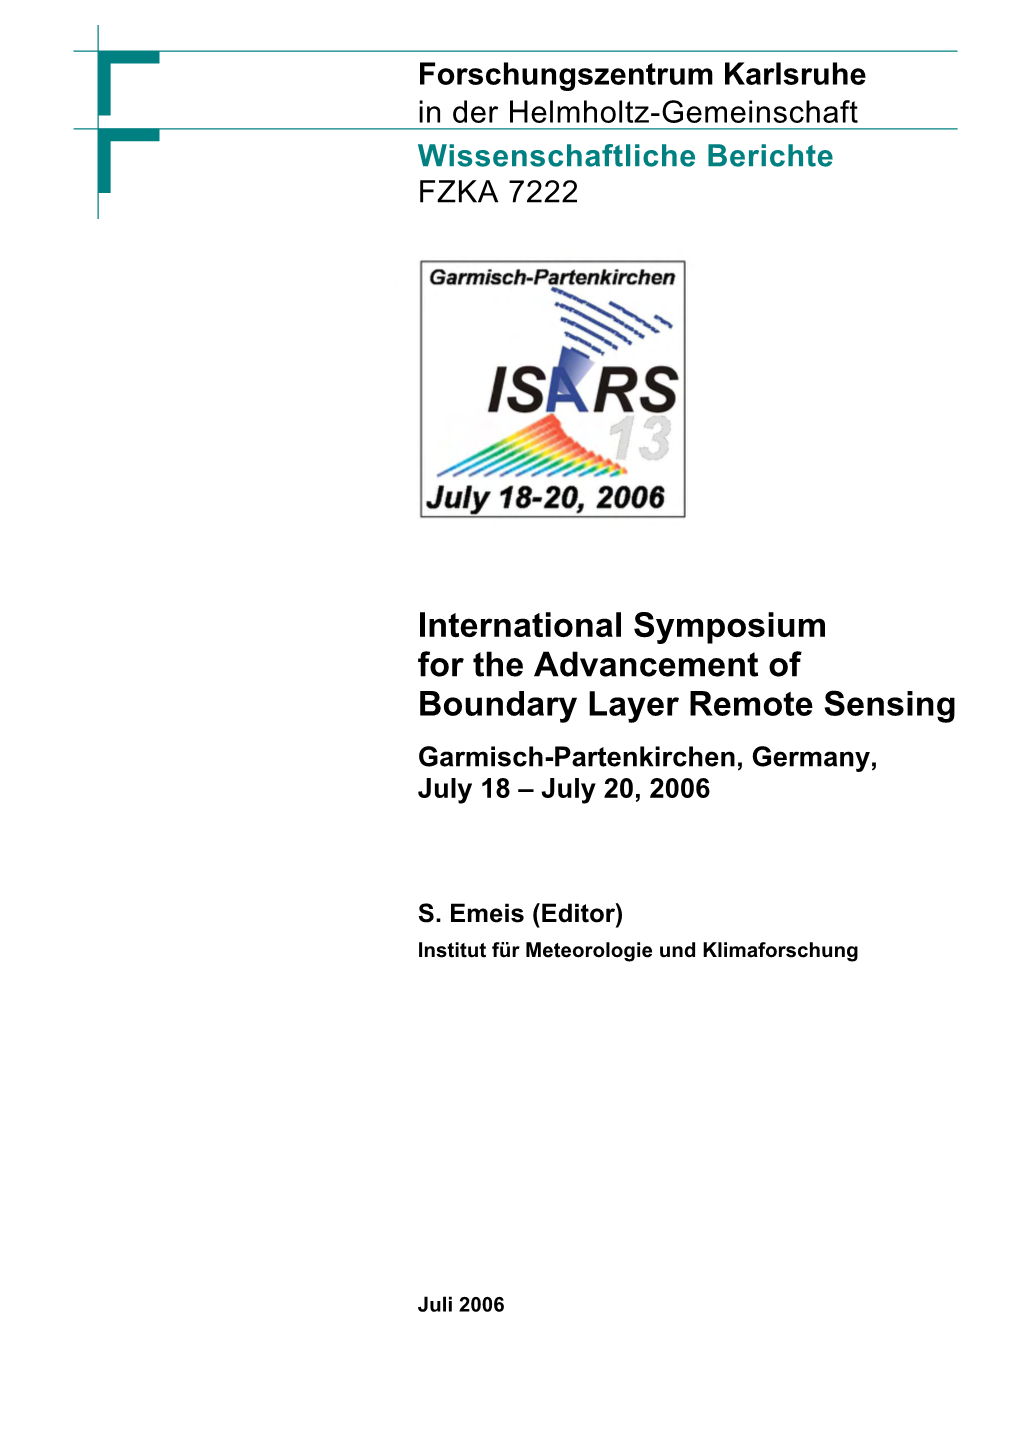 International Symposium for the Advancement of Boundary Layer Remote Sensing